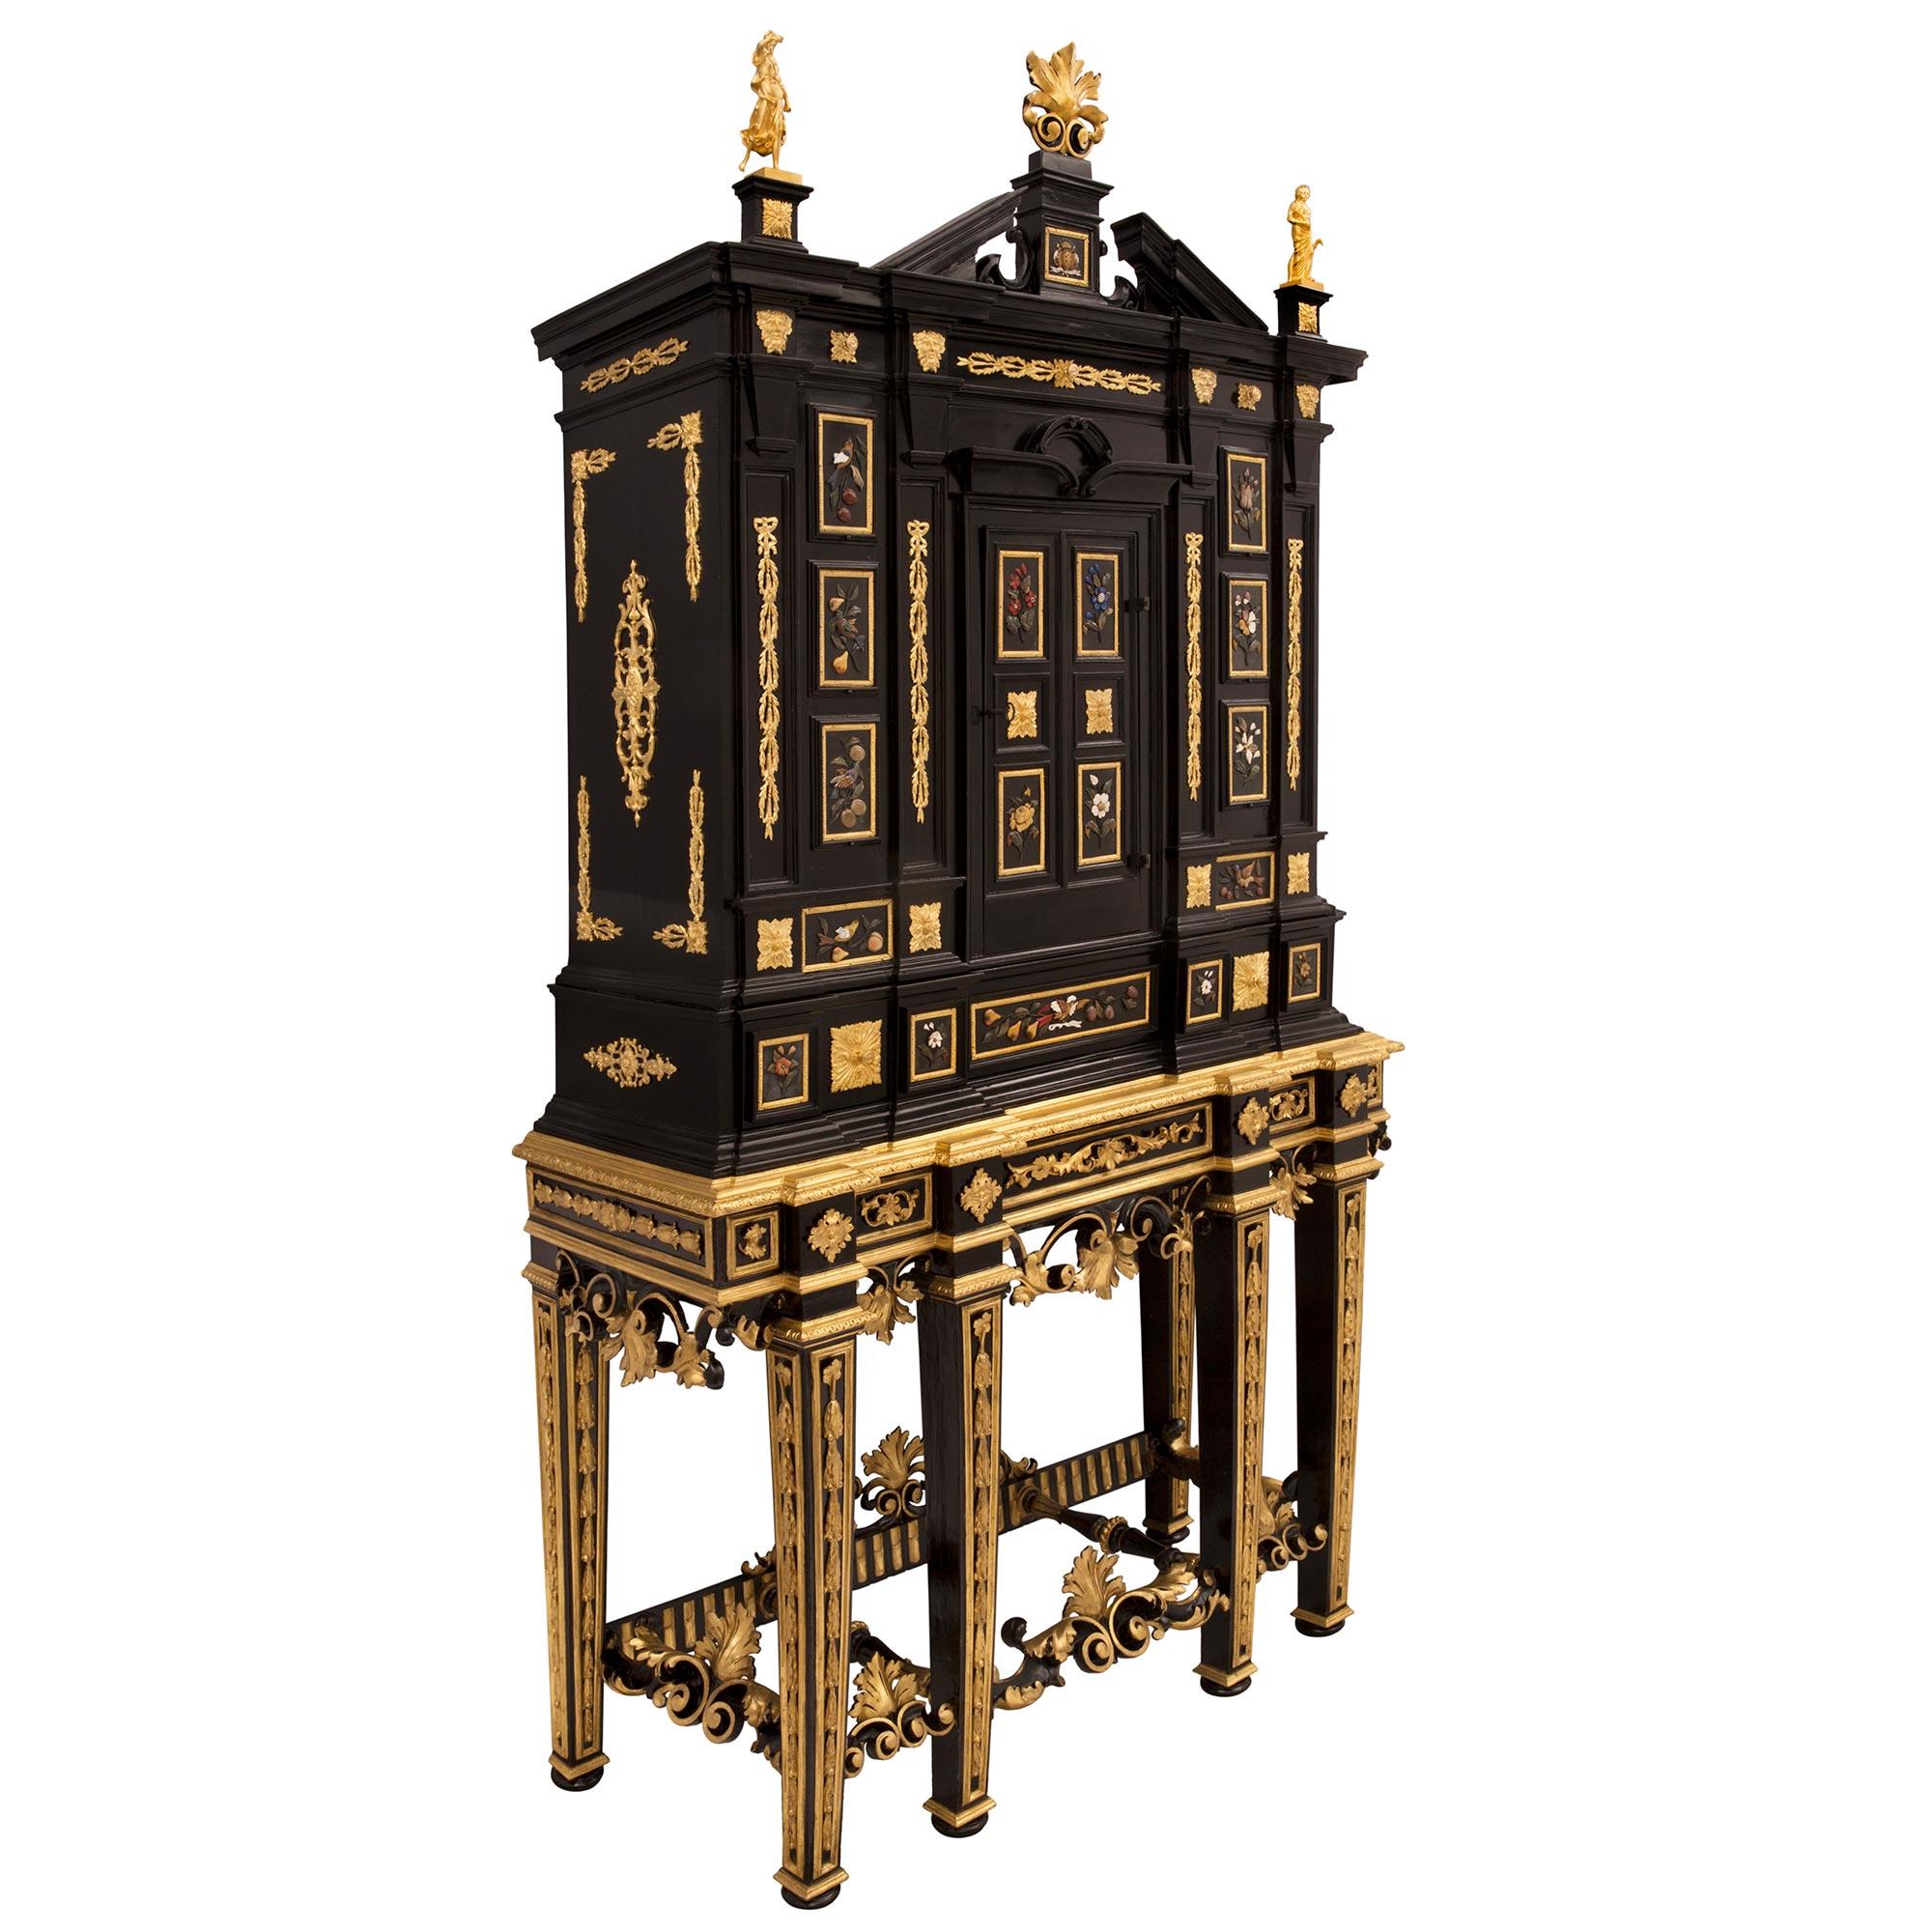 A stunning Italian 19th century Baroque st. ebonized fruitwood, giltwood, ormolu and semi precious and hard stone Florentine cabinet. The cabinet is raised by a unique and most decorative base with six striking square tapered legs with fine bun feet